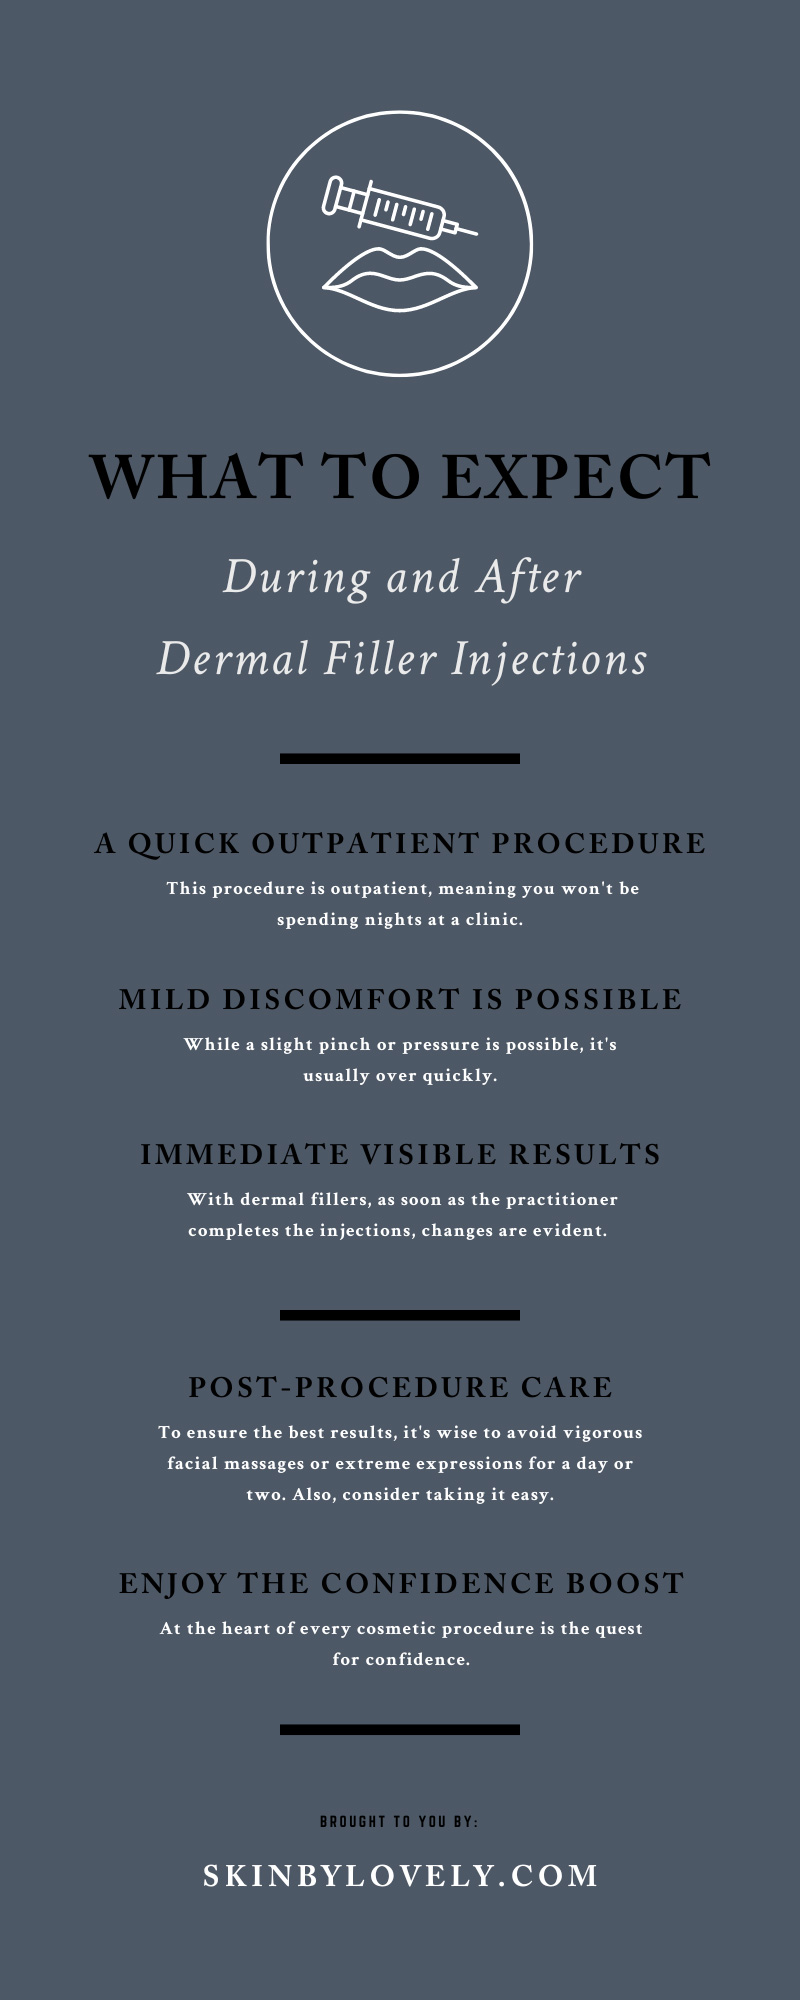 What To Expect During and After Dermal Filler Injections